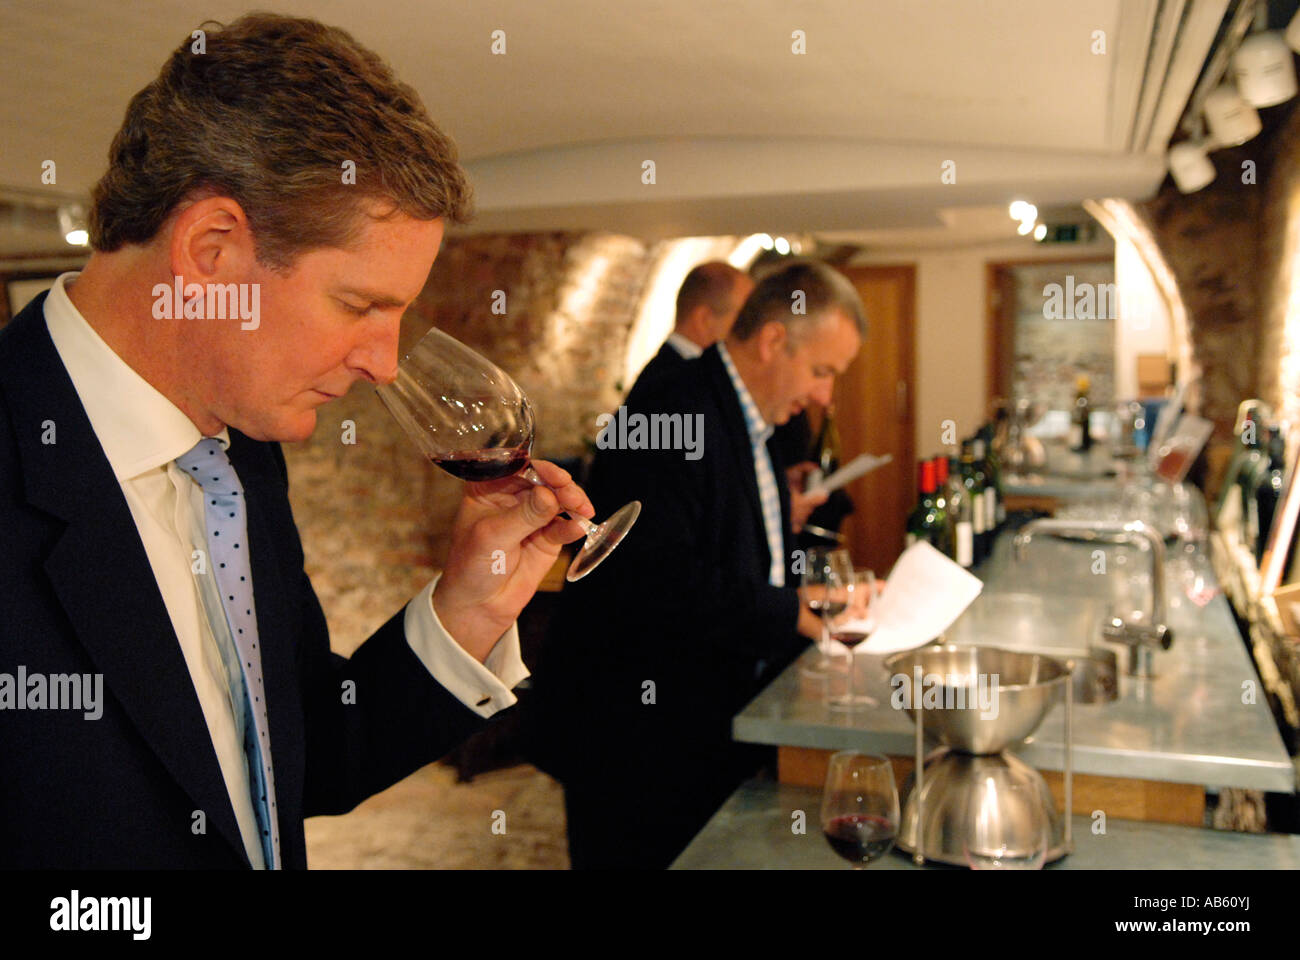 A wine tasting takes place. Stock Photo